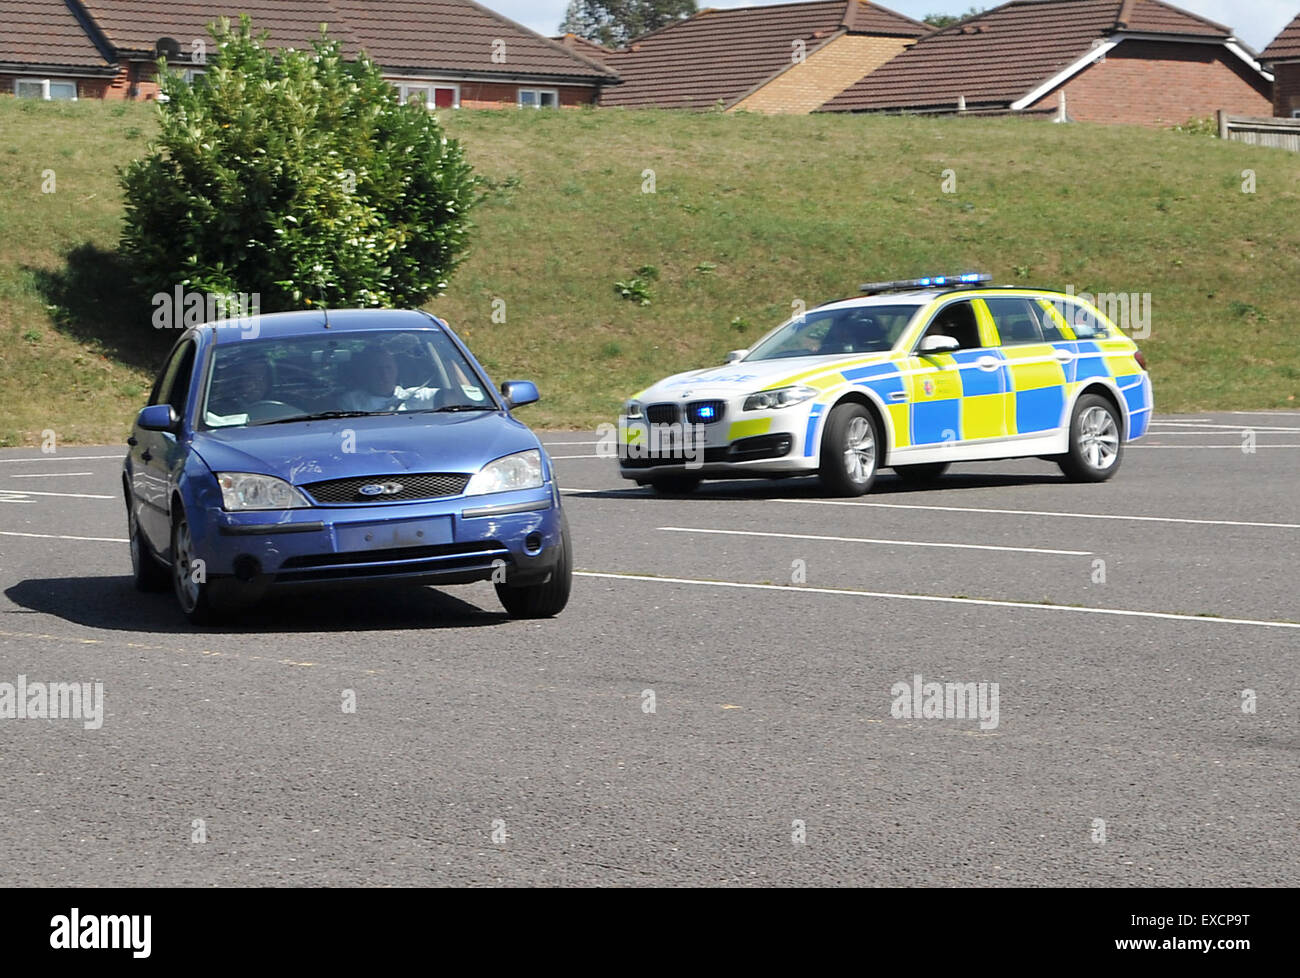 Maidstone, Kent, UK. 11th July, 2015. Police officers demostrate their skills and equipment at the Kent Police Open Day. Traffic officers chase a fleeing suspect. Credit:  Matthew Richardson/Alamy Live News Stock Photo